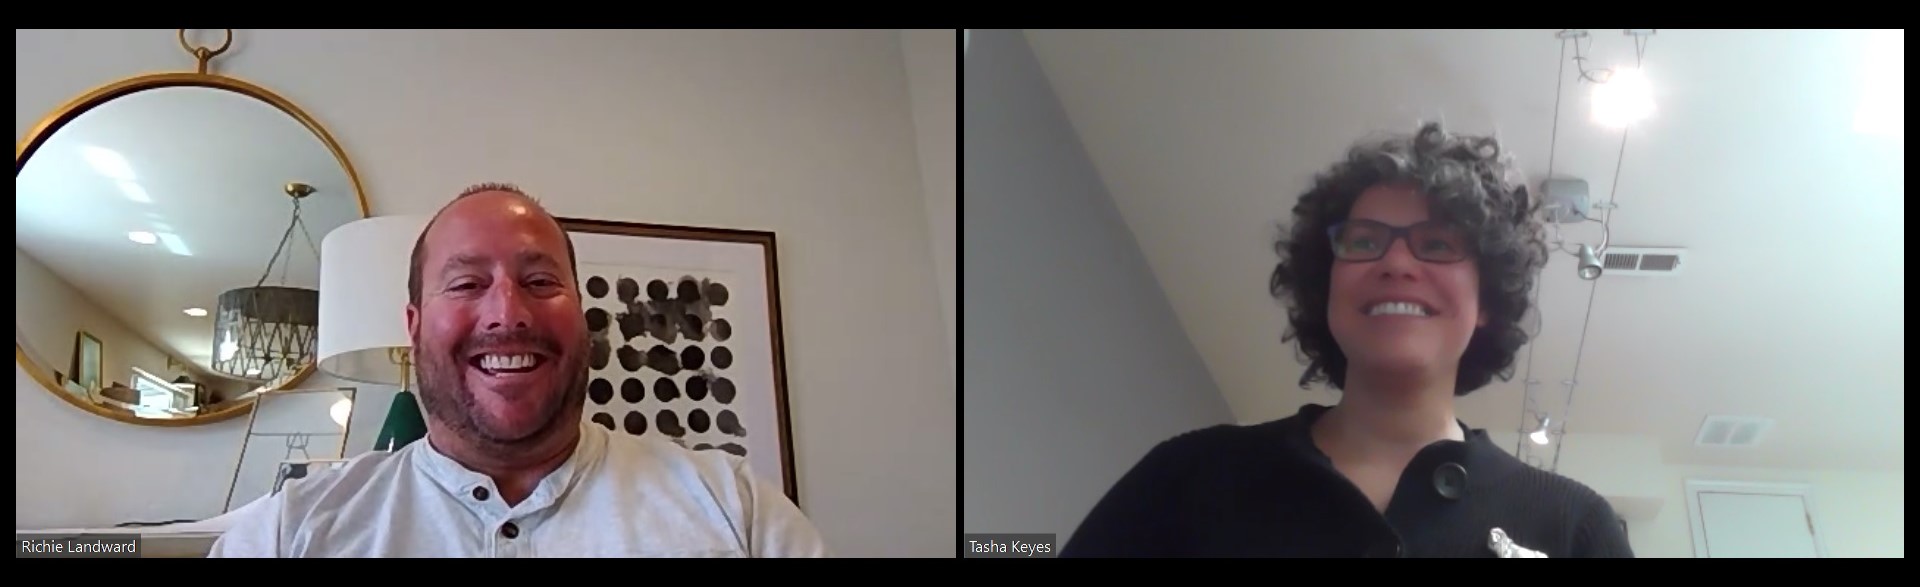 A screenshot of a video conference with College of Social Work professors Rich Landward and Tasha Seneca Keyes